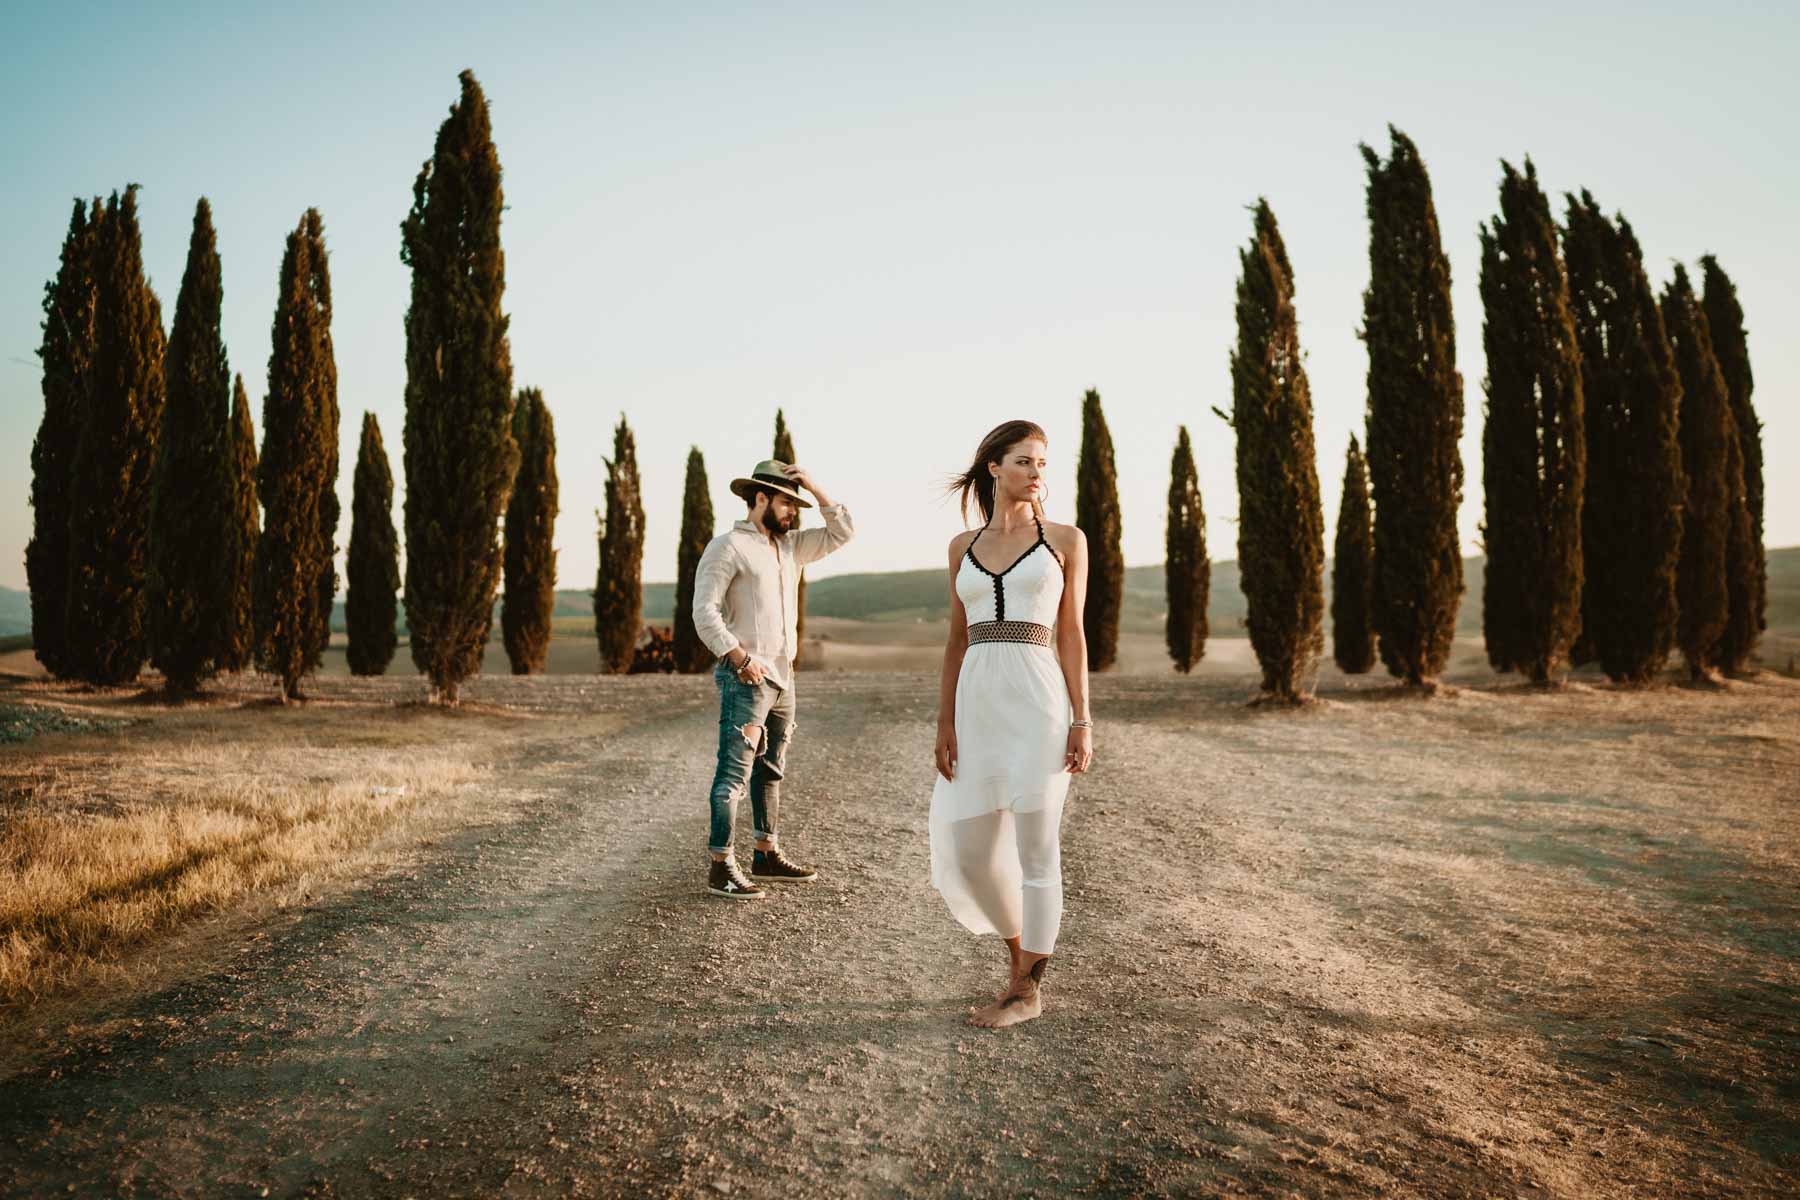 PREWEDDING IN VAL D'ORCIA - TUSCANY